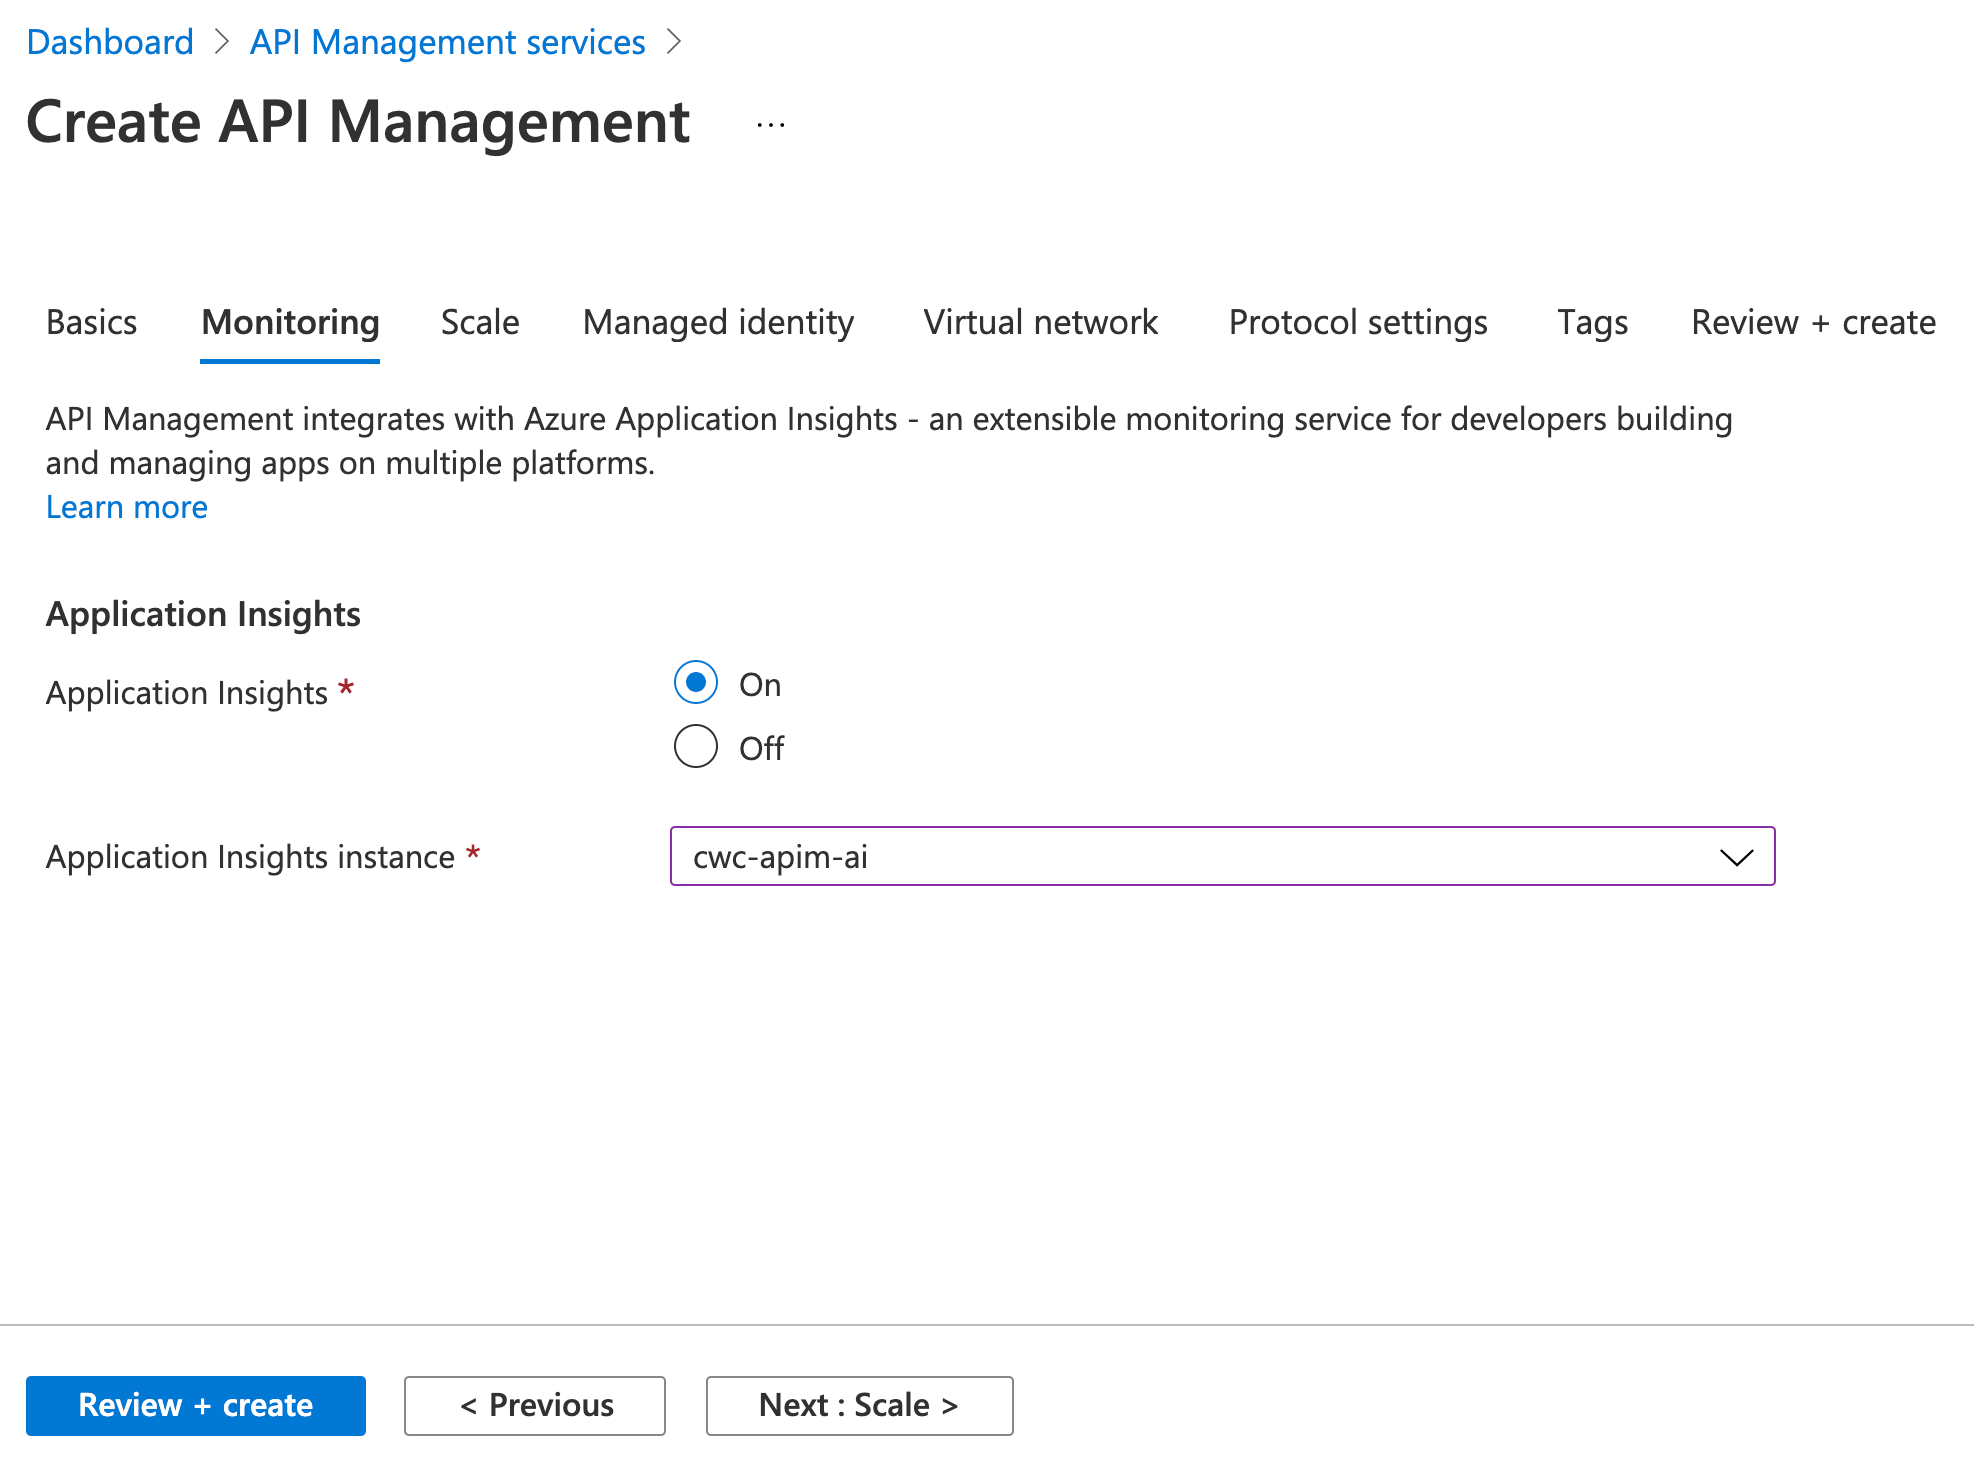 Associating Application Insights with the API Management Resource